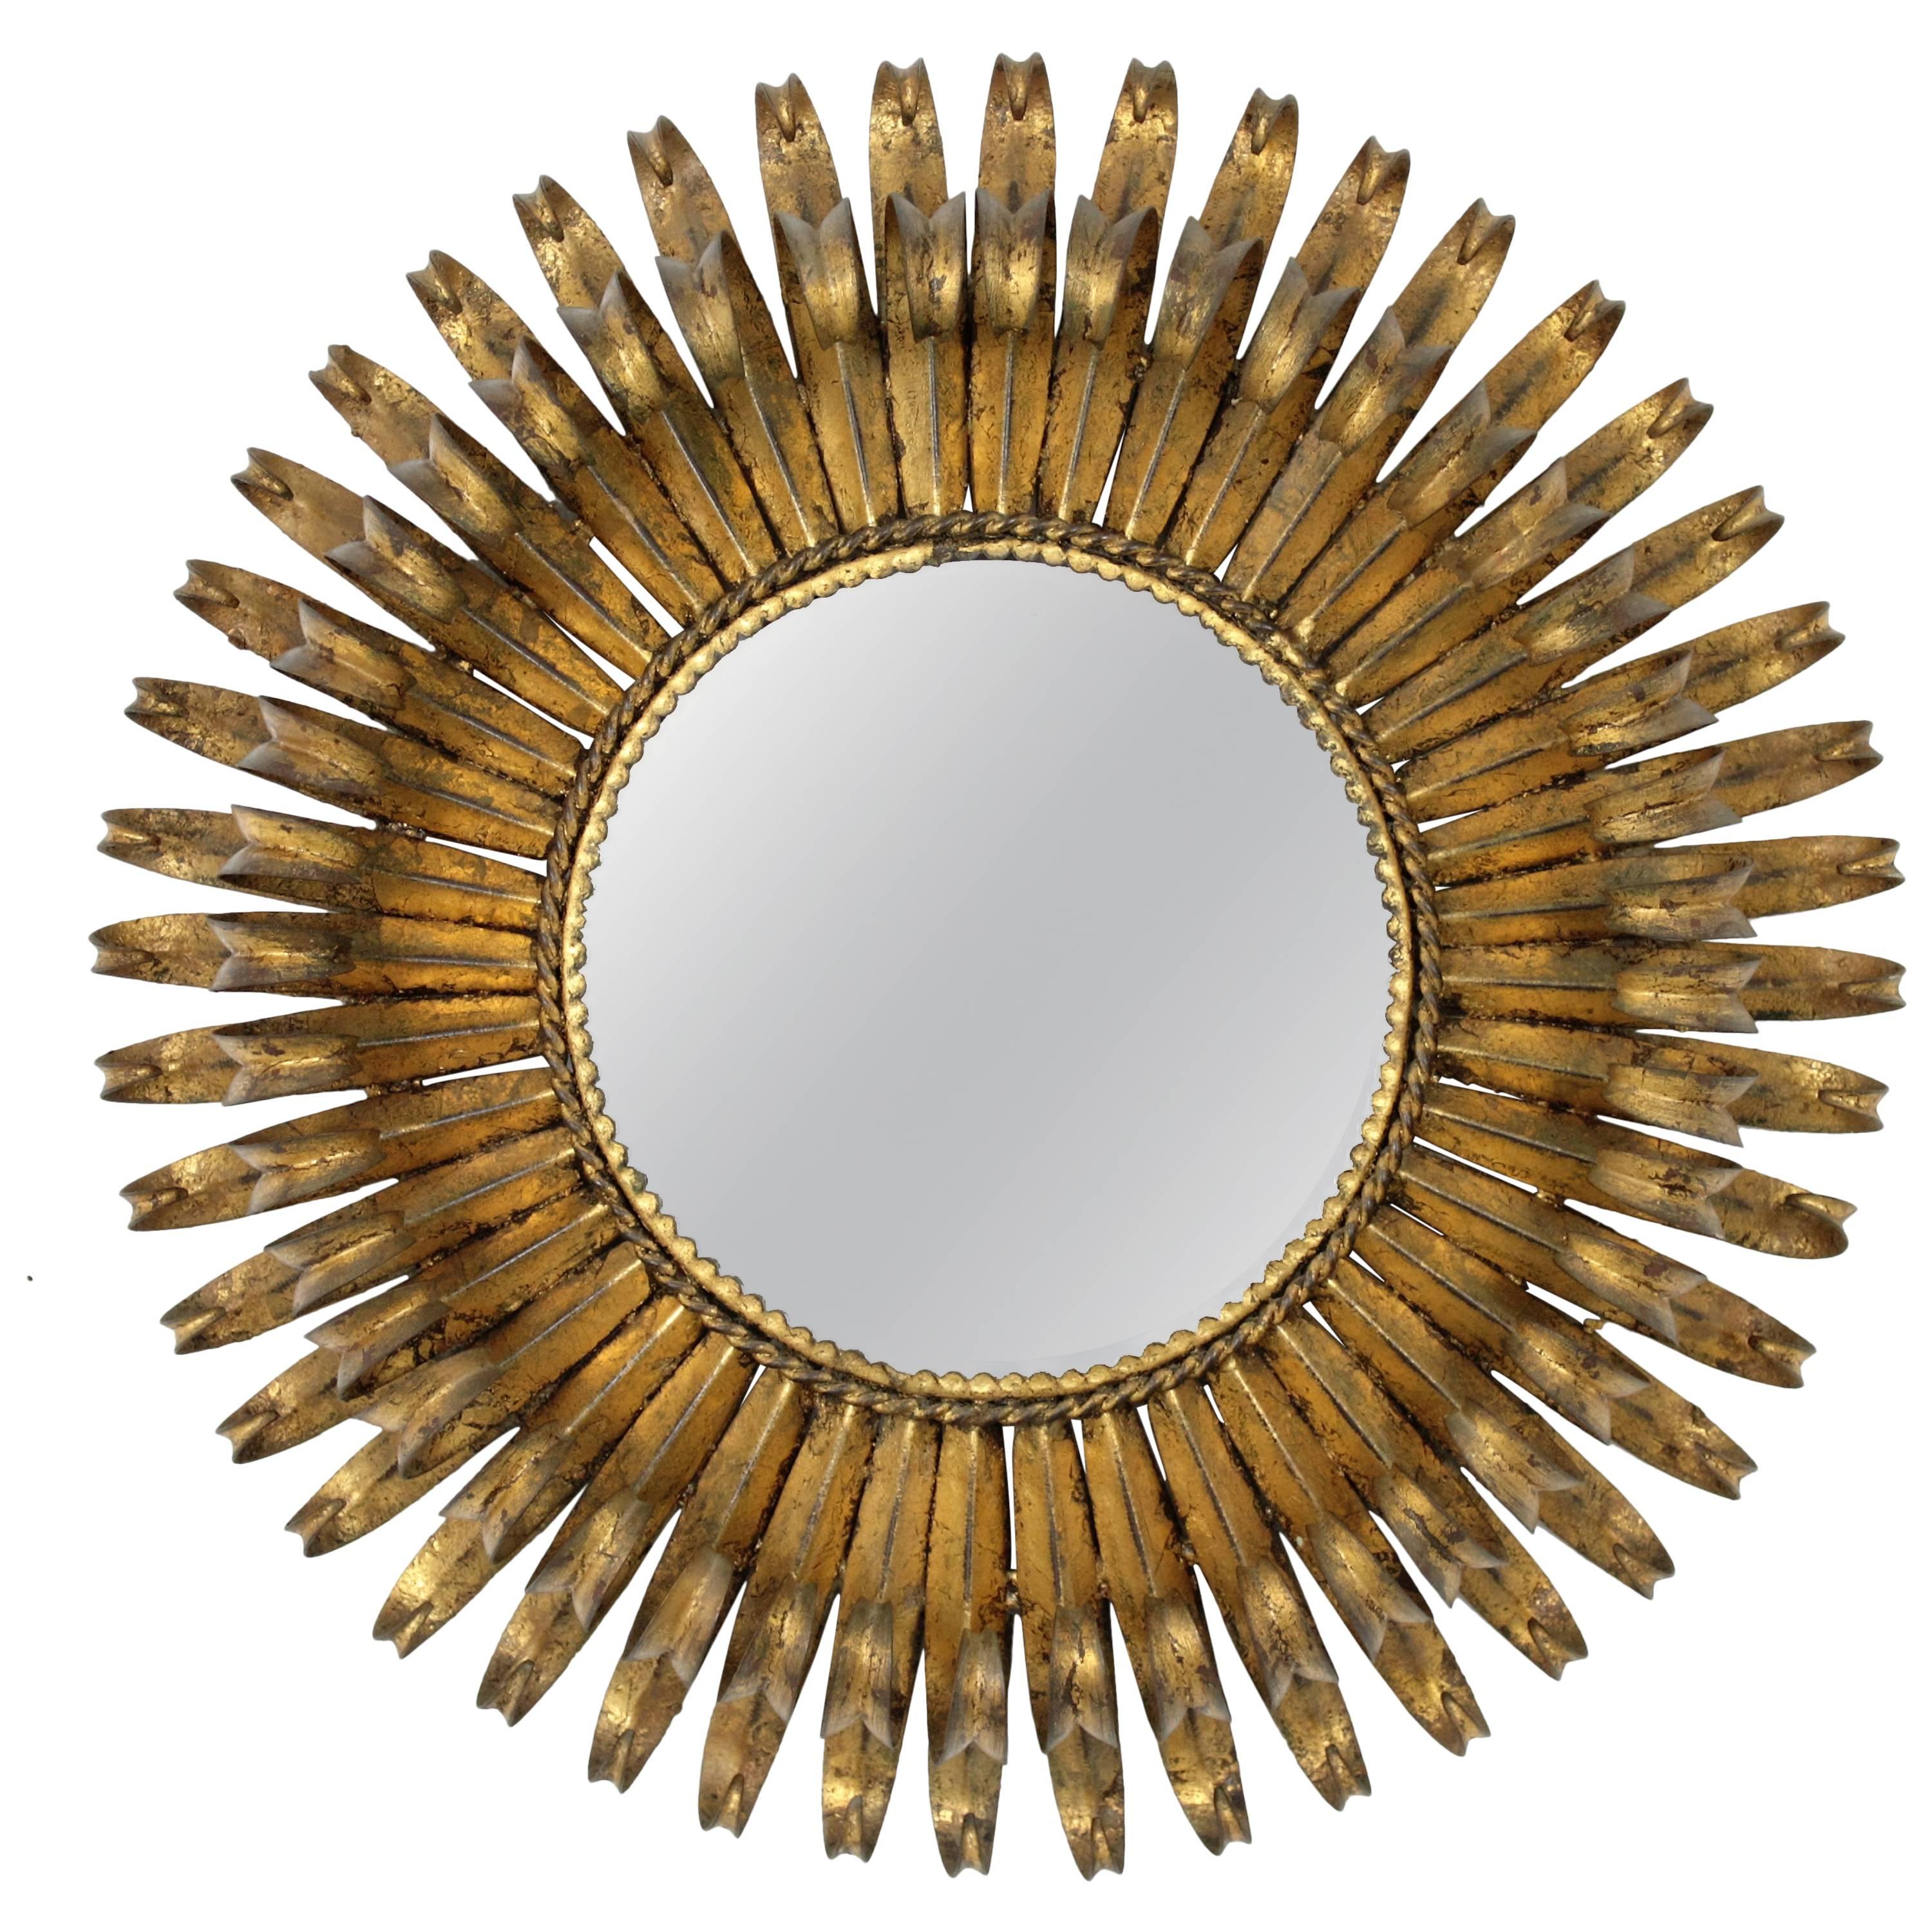 Lovely 1950s hand-hammered eyelashed gilt iron sunburst mirror with gold leaf finish and circular shape.
The frame is made by a double layer of curved beams in eyelash shape that makes the piece highly decorative. It has a beautiful original vintage